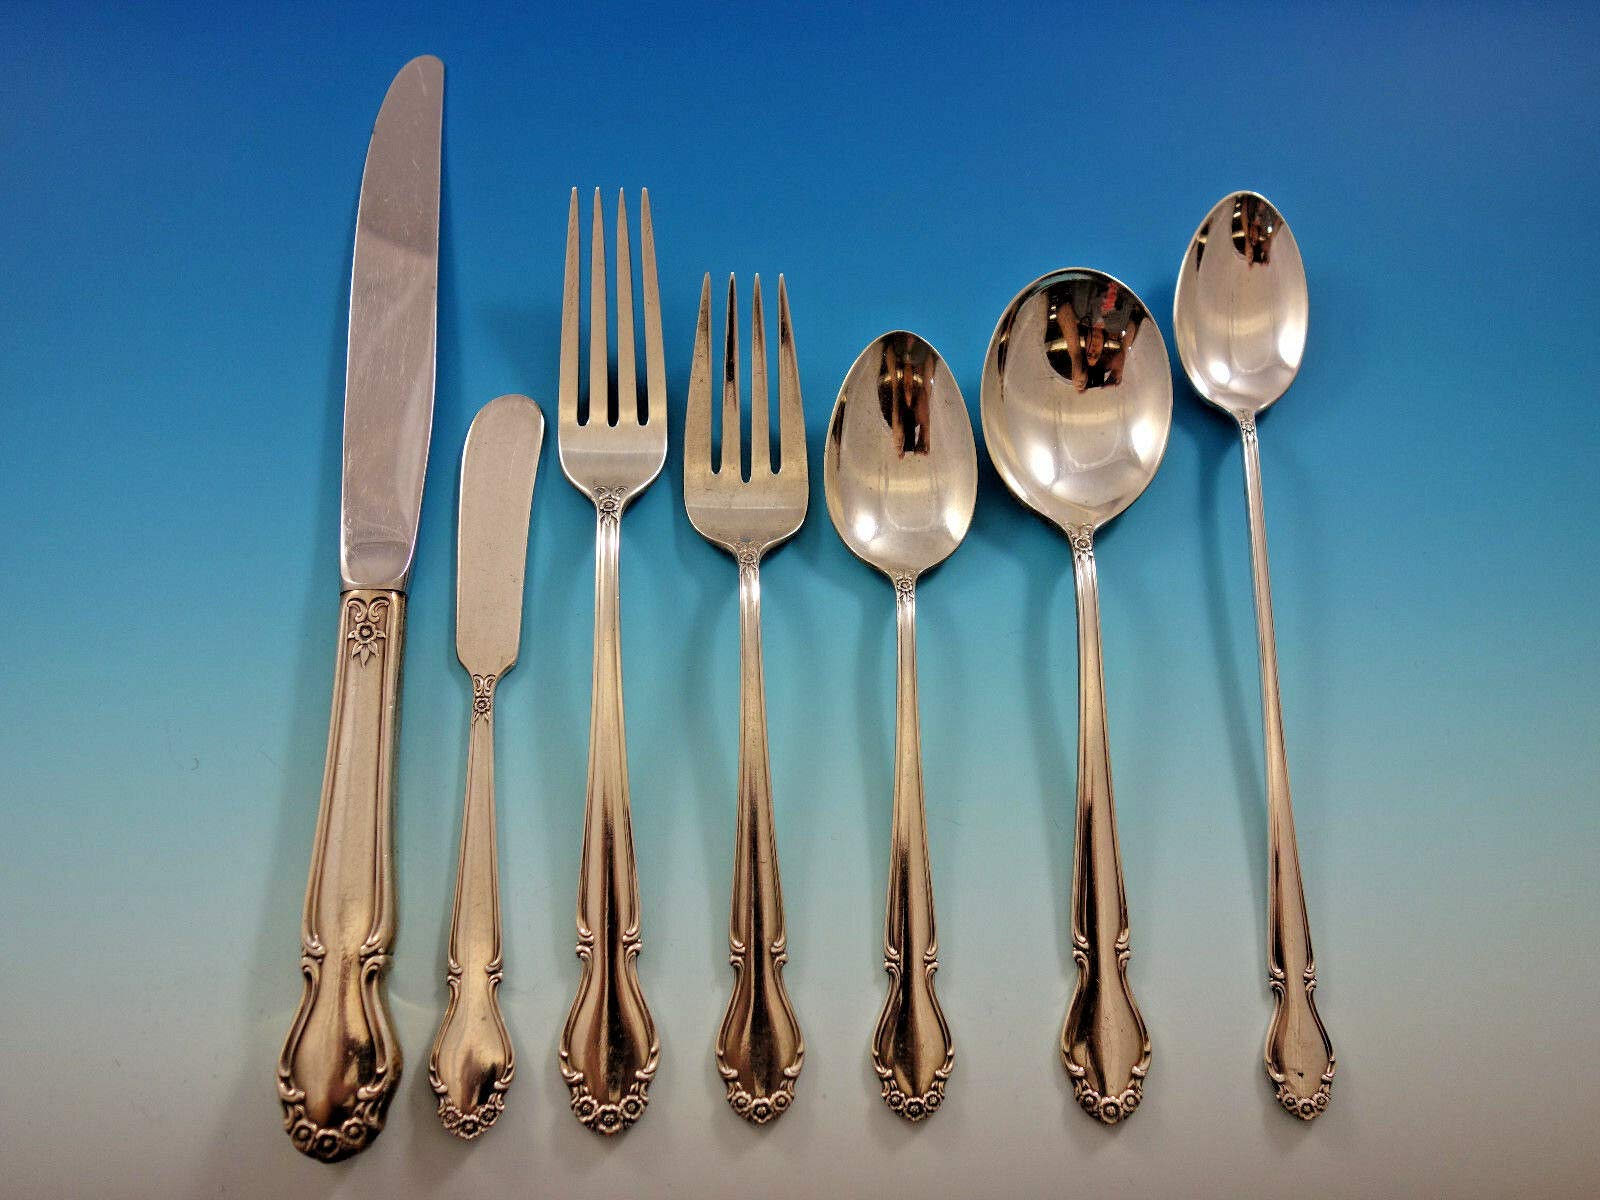 https://storables.com/wp-content/uploads/2023/09/how-to-store-sterling-silver-flatware-1695739553.jpg